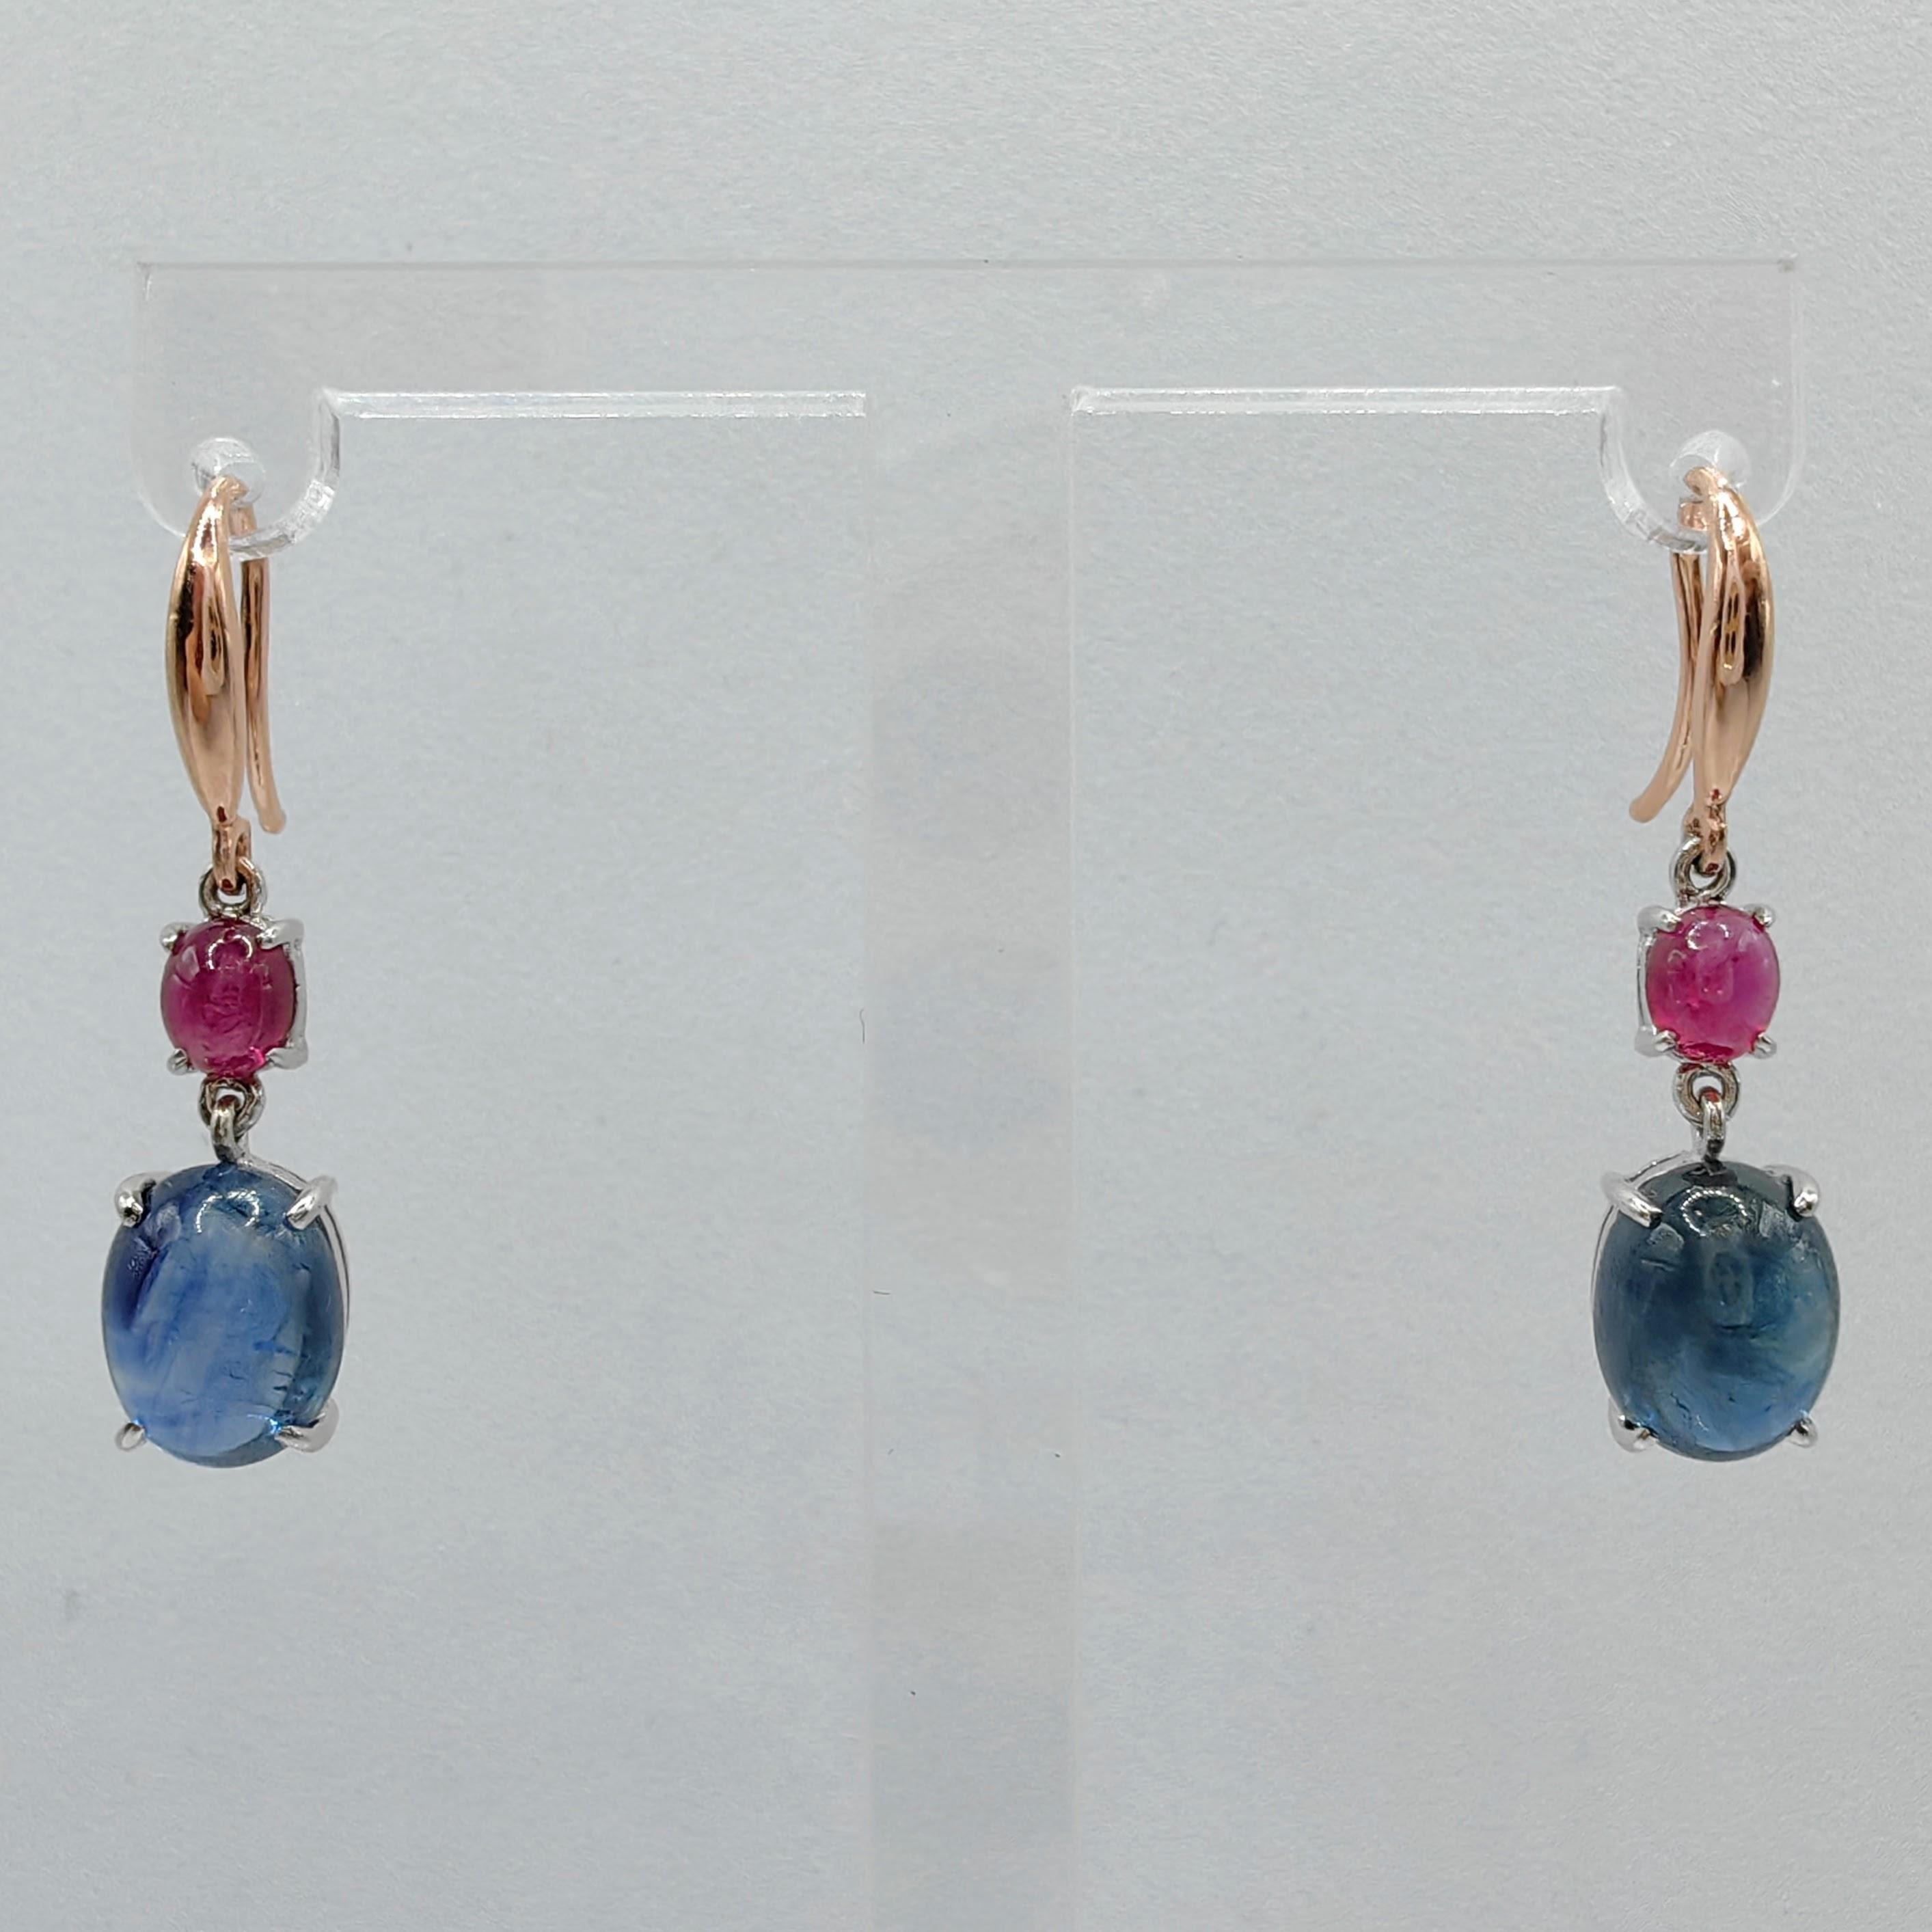 Introducing our exquisite 6.85ct Cabochon Sapphire Ruby Dangling Earrings in 18K Two-tone Rose & White Gold, a mesmerizing fusion of color and elegance that will elevate your style to new heights.

These stunning earrings feature a pair of